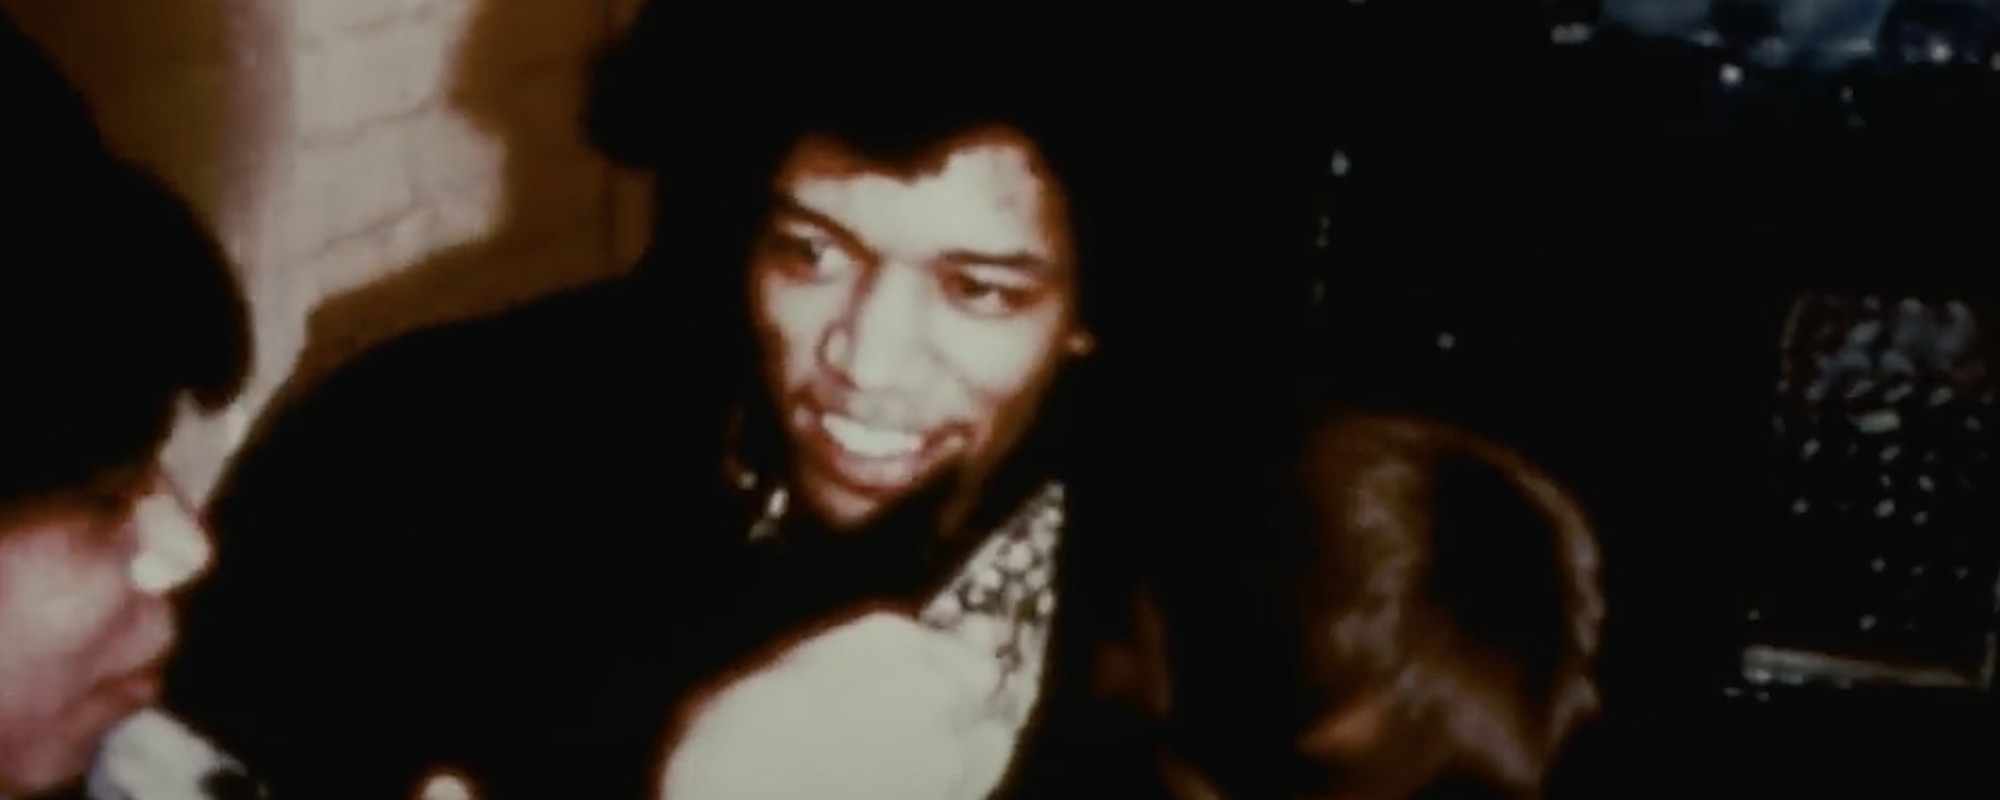 Lost Audio of Jimi Hendrix’s Final 1970 Performance Featured in Ronnie Scott Documentary